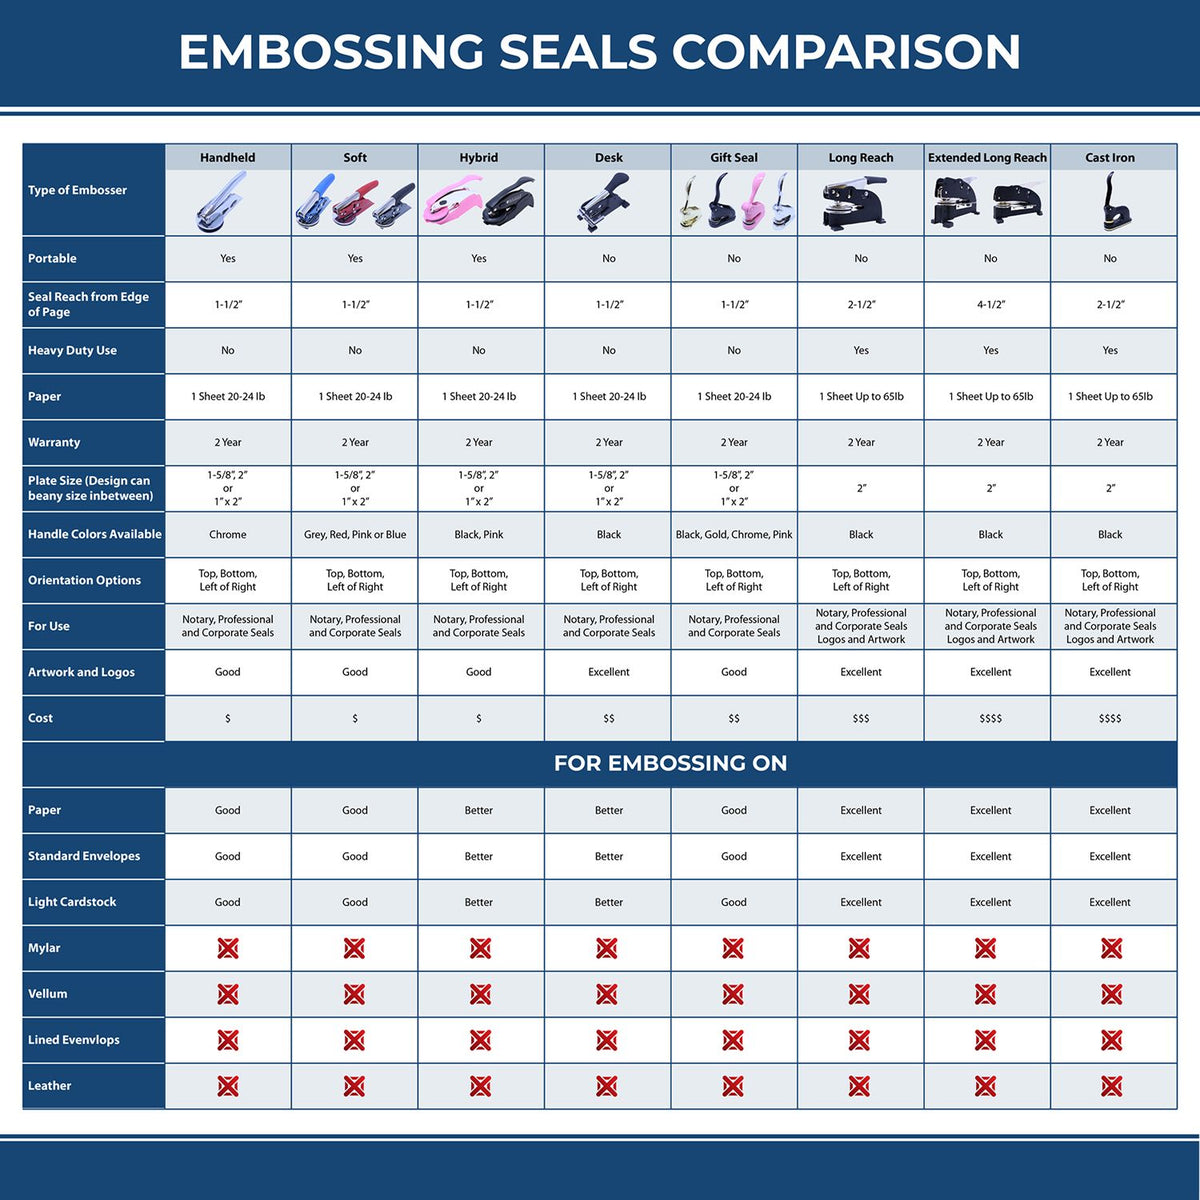 A comparison chart for the different types of mount models available for the Handheld Alabama Architect Seal Embosser.